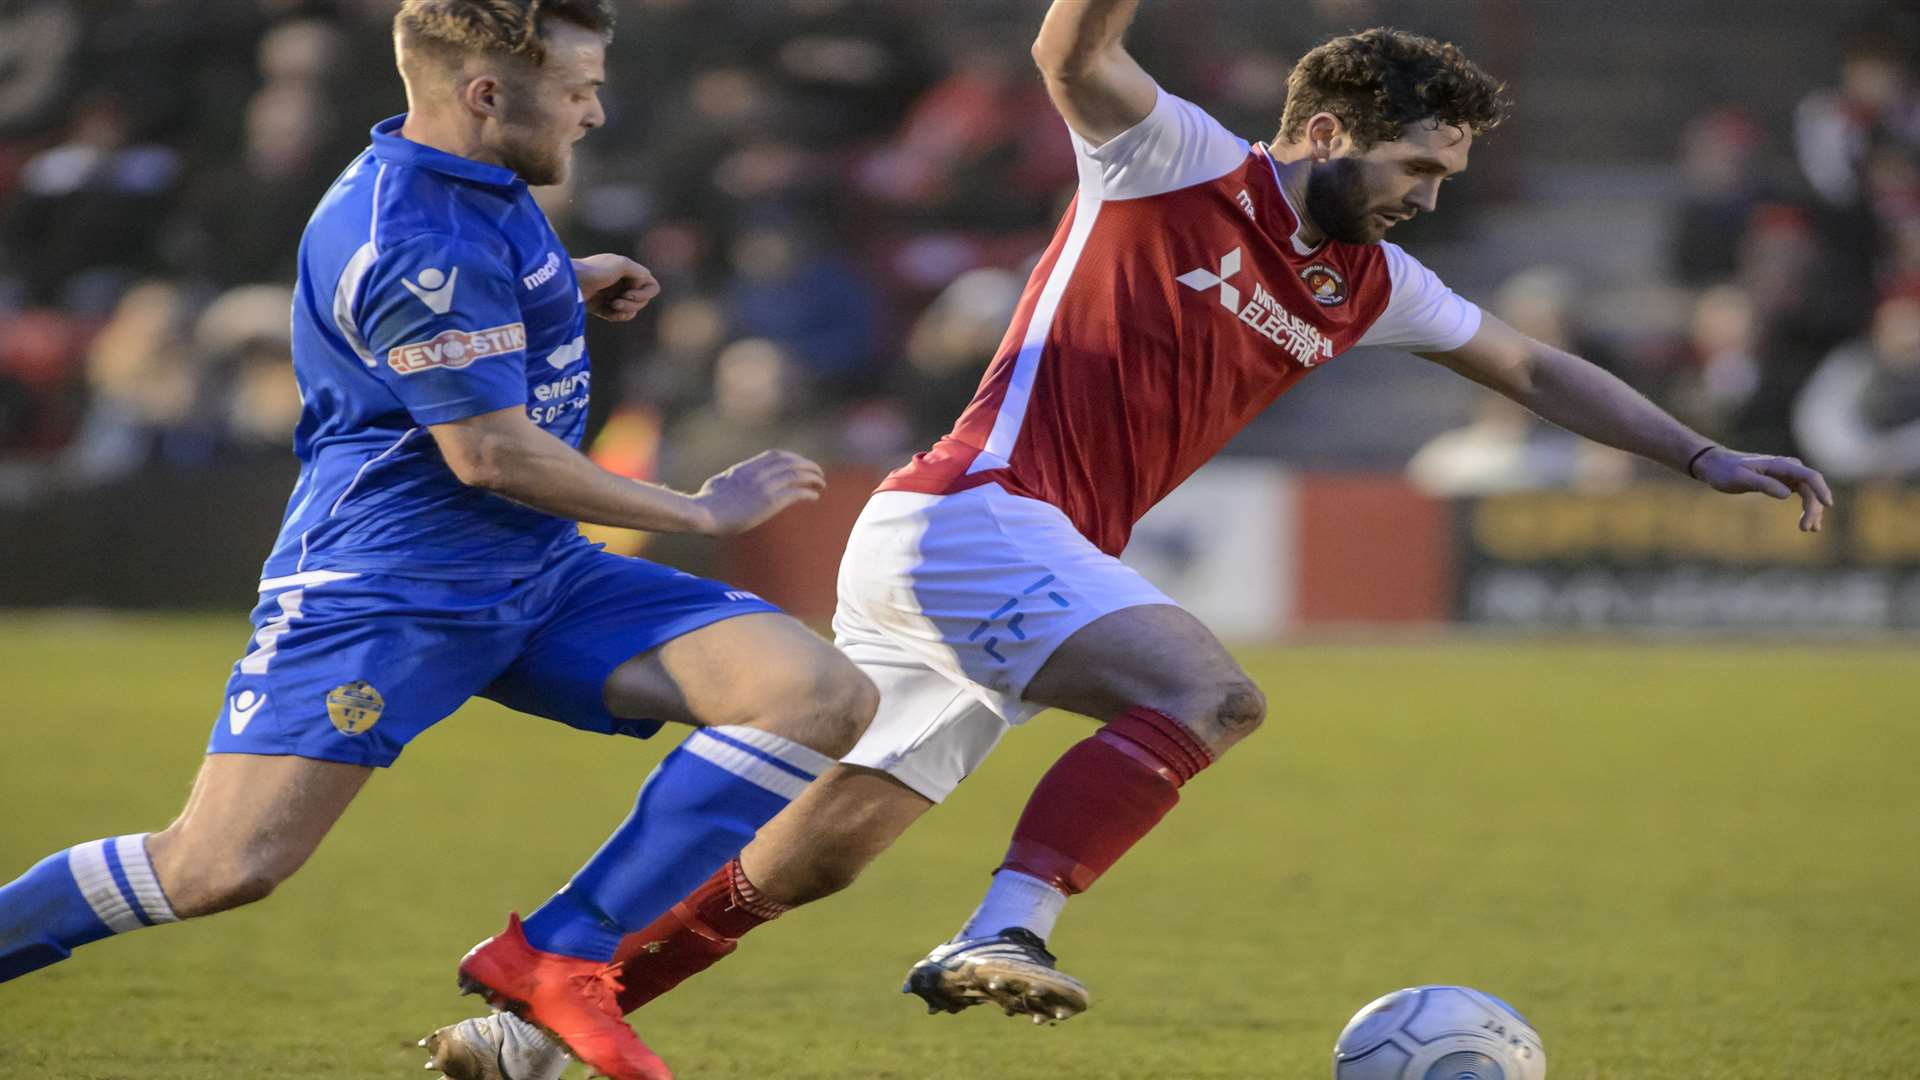 Dean Rance insists Ebbsfleet won't take their foot off the gas Picture: Andy Payton